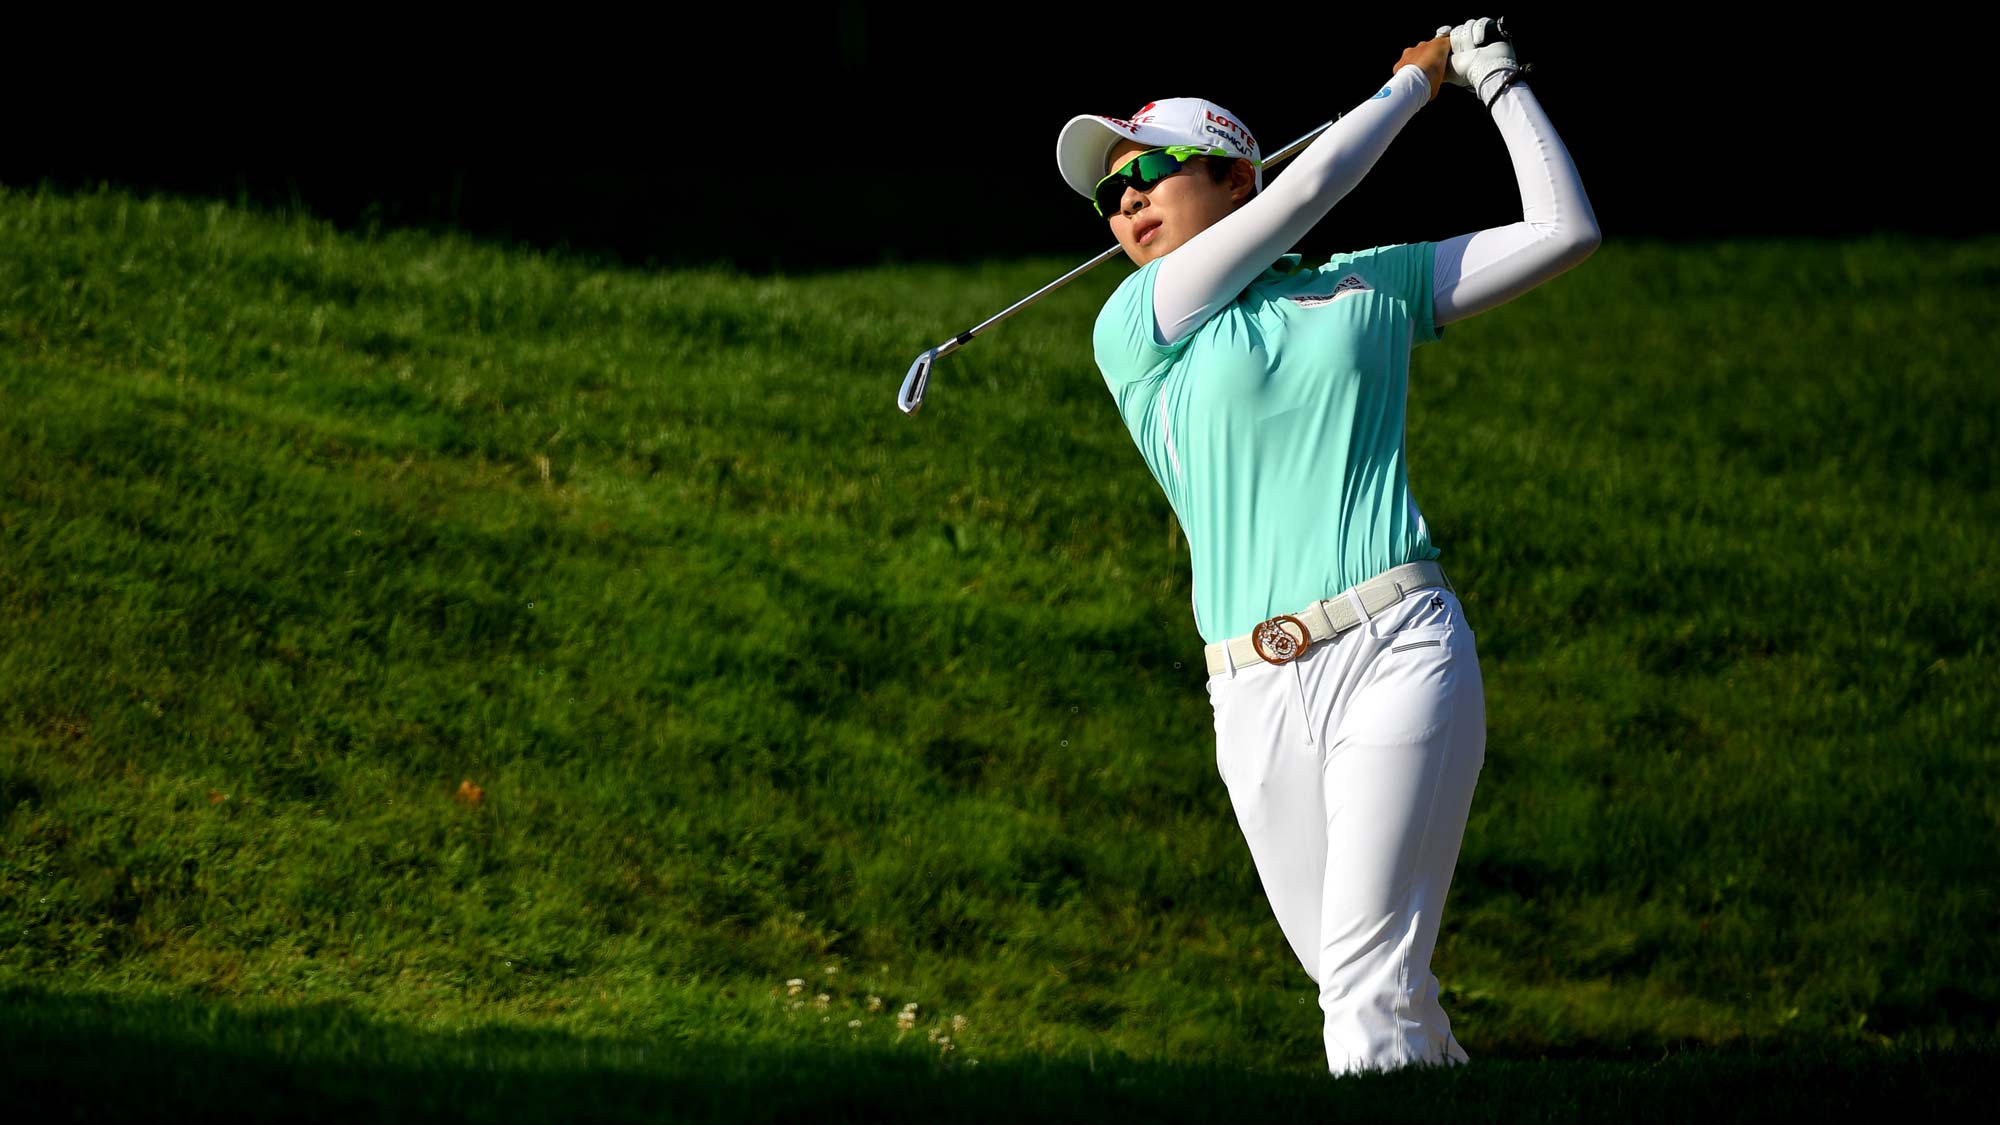 Hyo Joo Kim of Korea on the first during day 1 of the Evian Championship